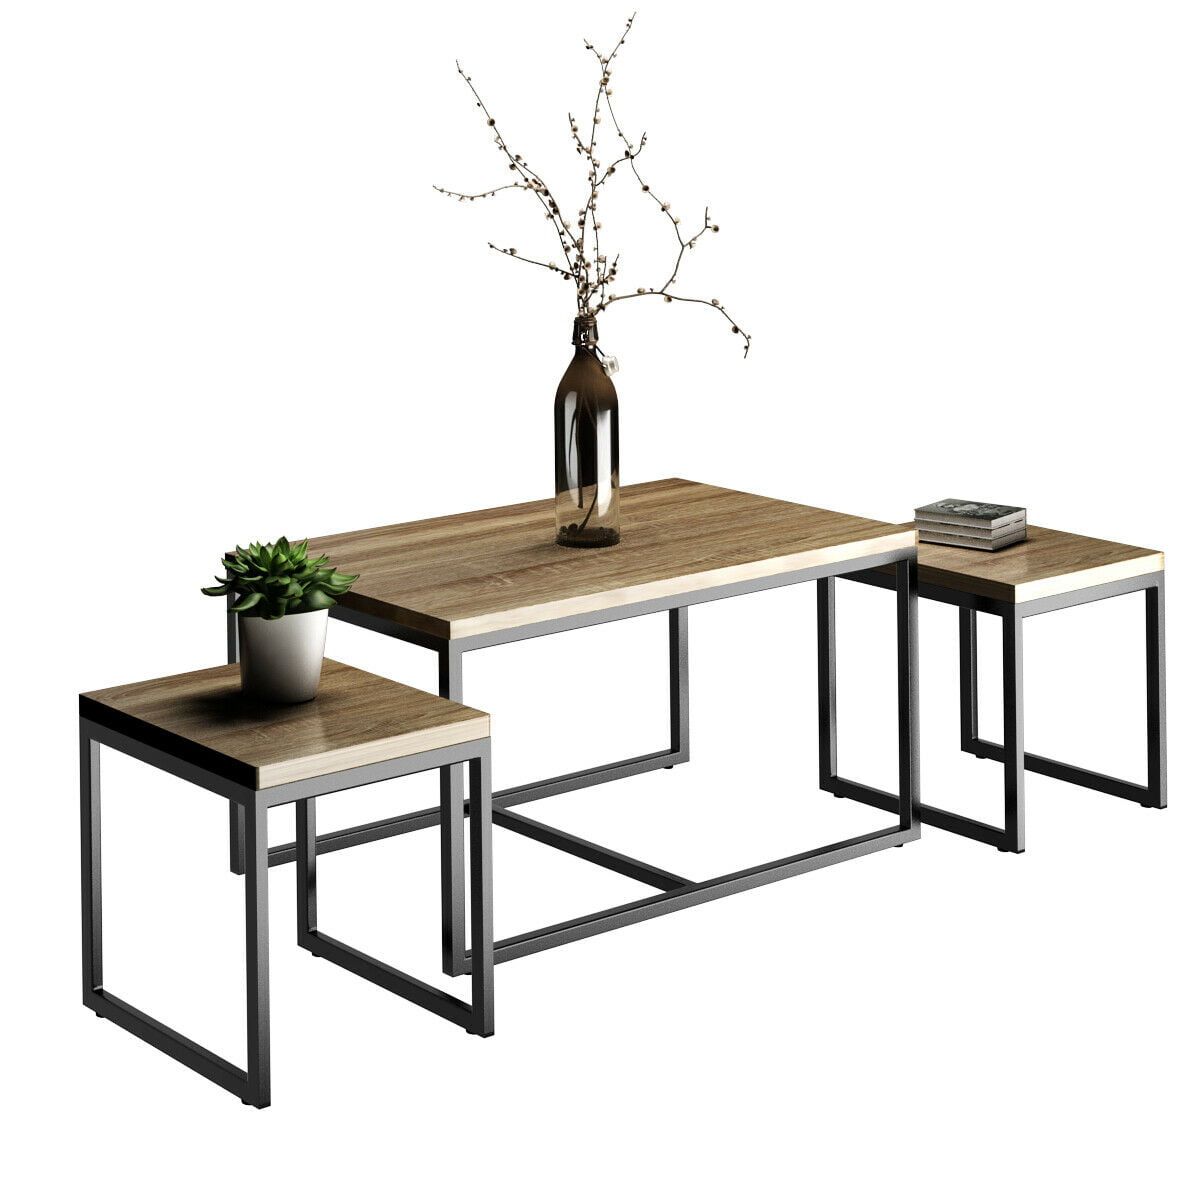 Costway 3 Piece Nesting Coffee & End Table Set Wood Modern Living Room Throughout Coffee Tables Of 3 Nesting Tables (View 3 of 20)